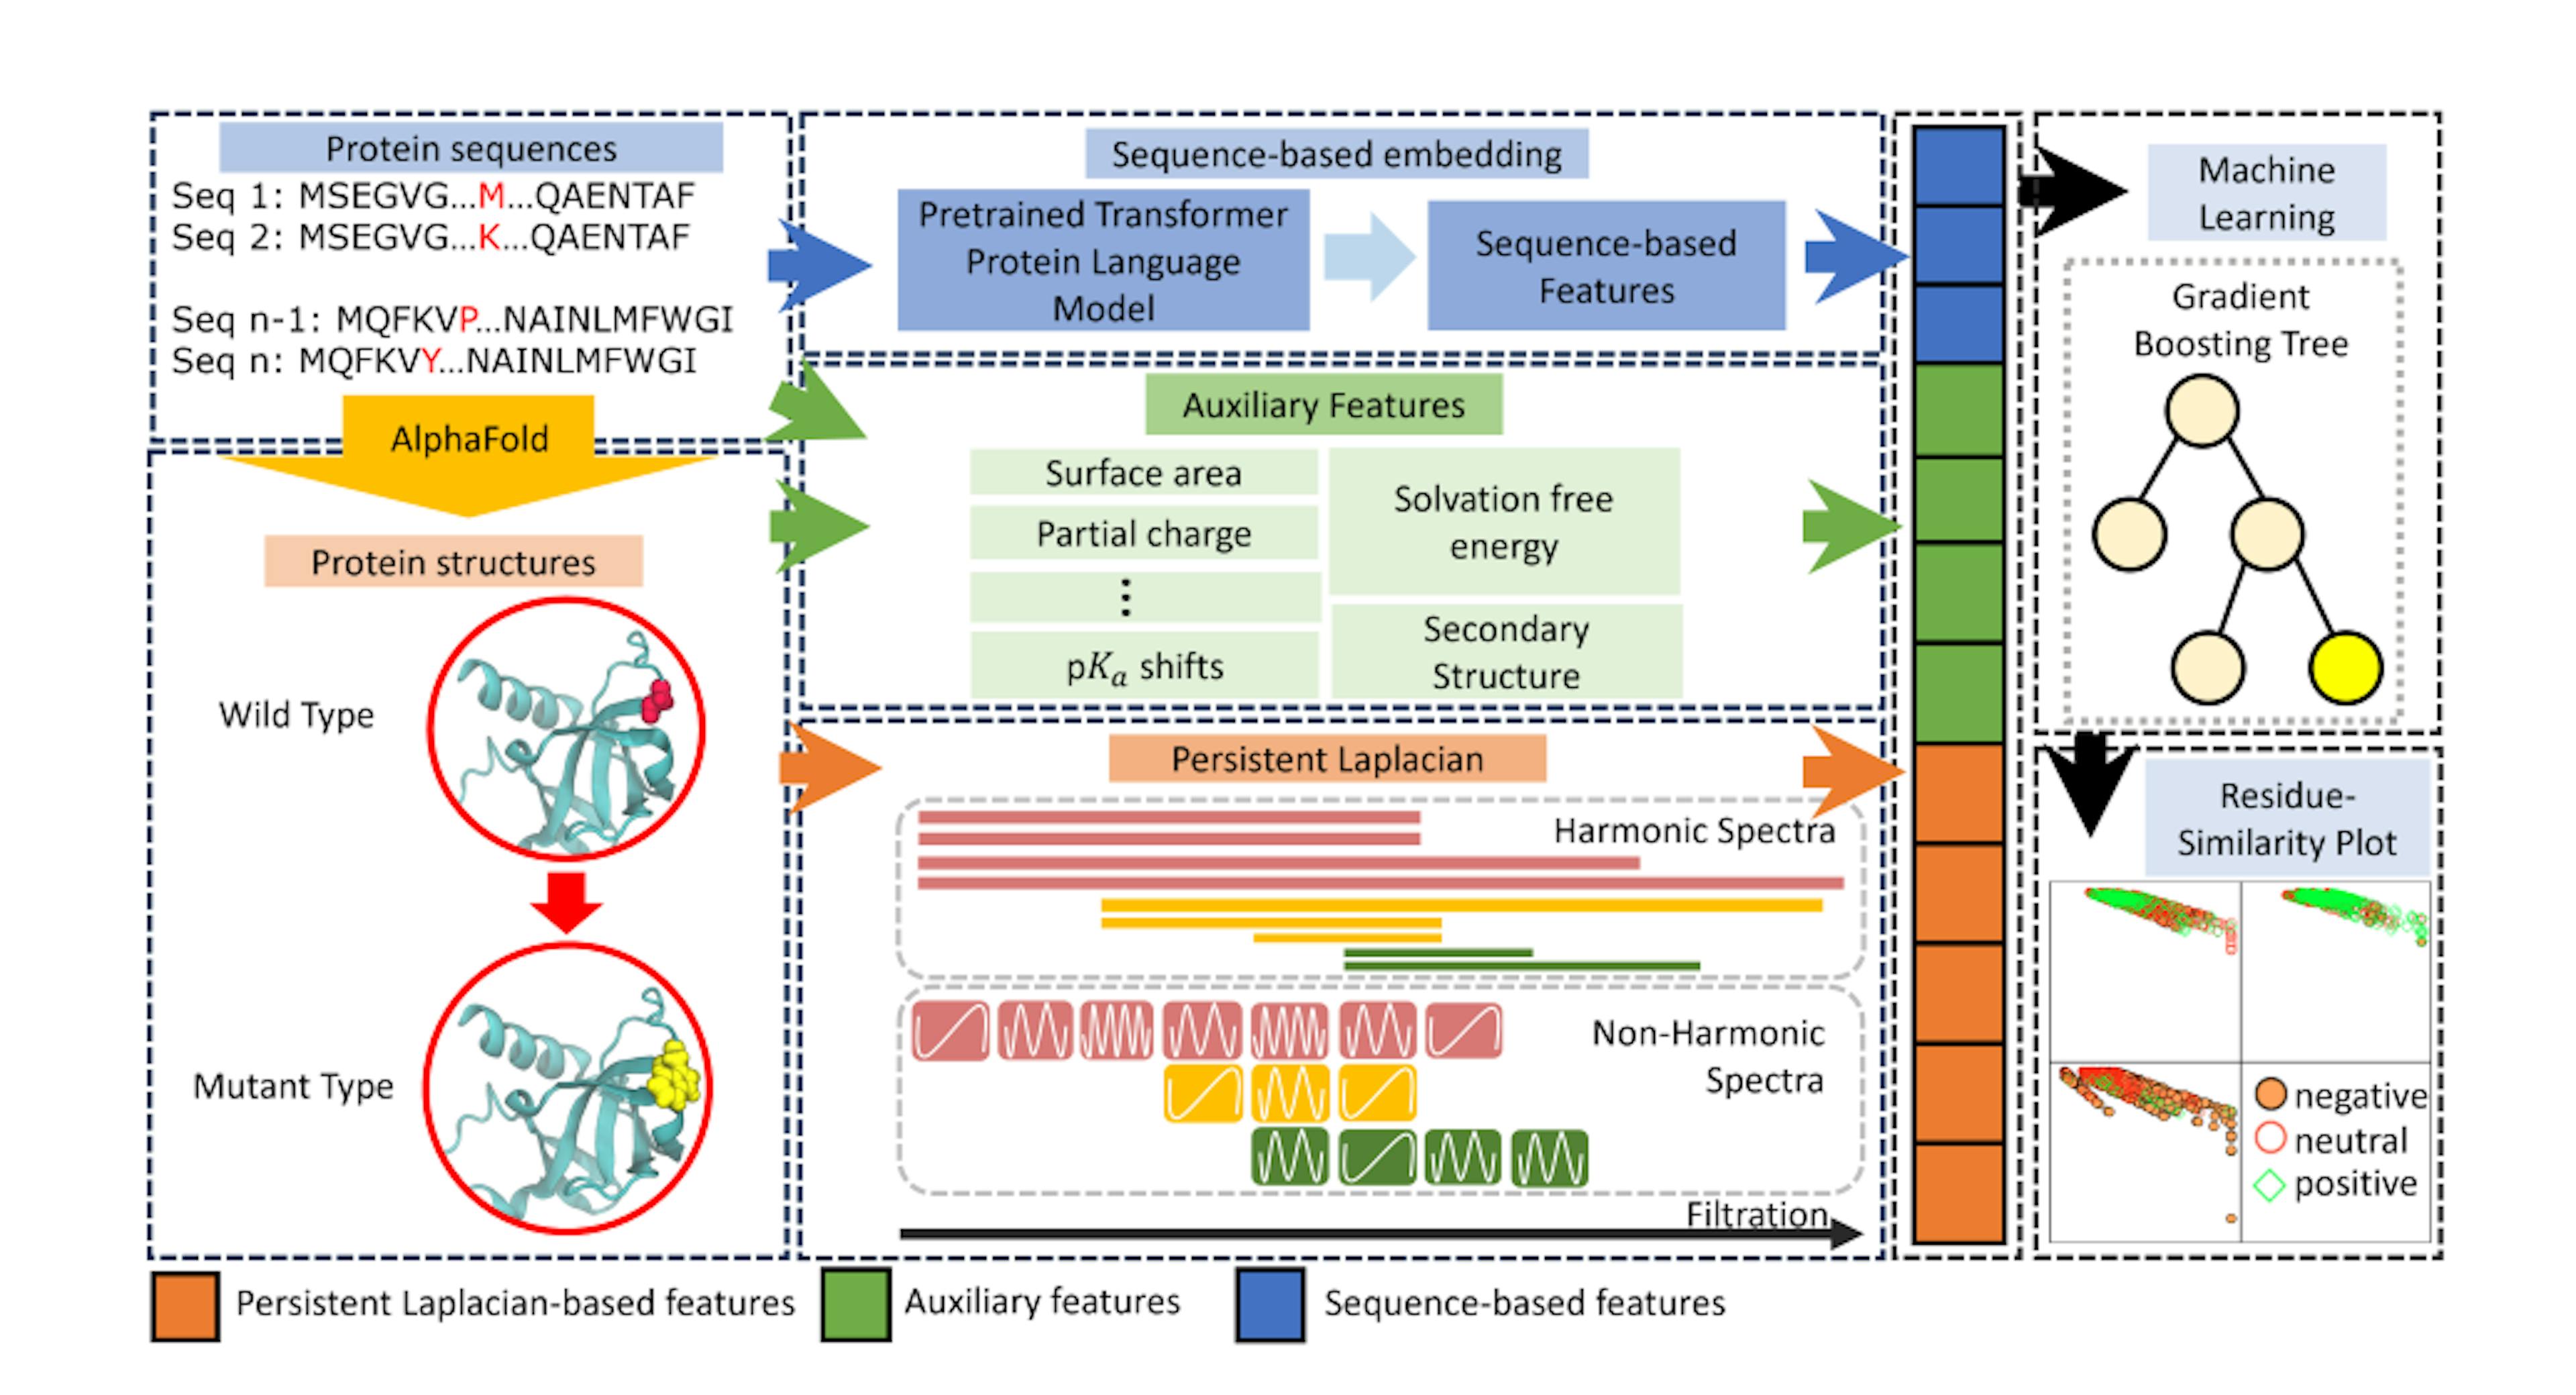 Figure 1: The illustration of the workflow for TopLapGBT. Protein sequences are first preprocessed by AlphaFold 2 to generate wild type protein structures. Mutant proteins are generated from the Jackal software [38]. The structure-based features from persistent Laplacian, auxiliary and sequence-based features are then concatenated to form a long feature input for gradient boosting tree to classify the protein solubility changes upon mutation. The predicted labels are also analyzed on Residue-Similarity (R-S) plots.